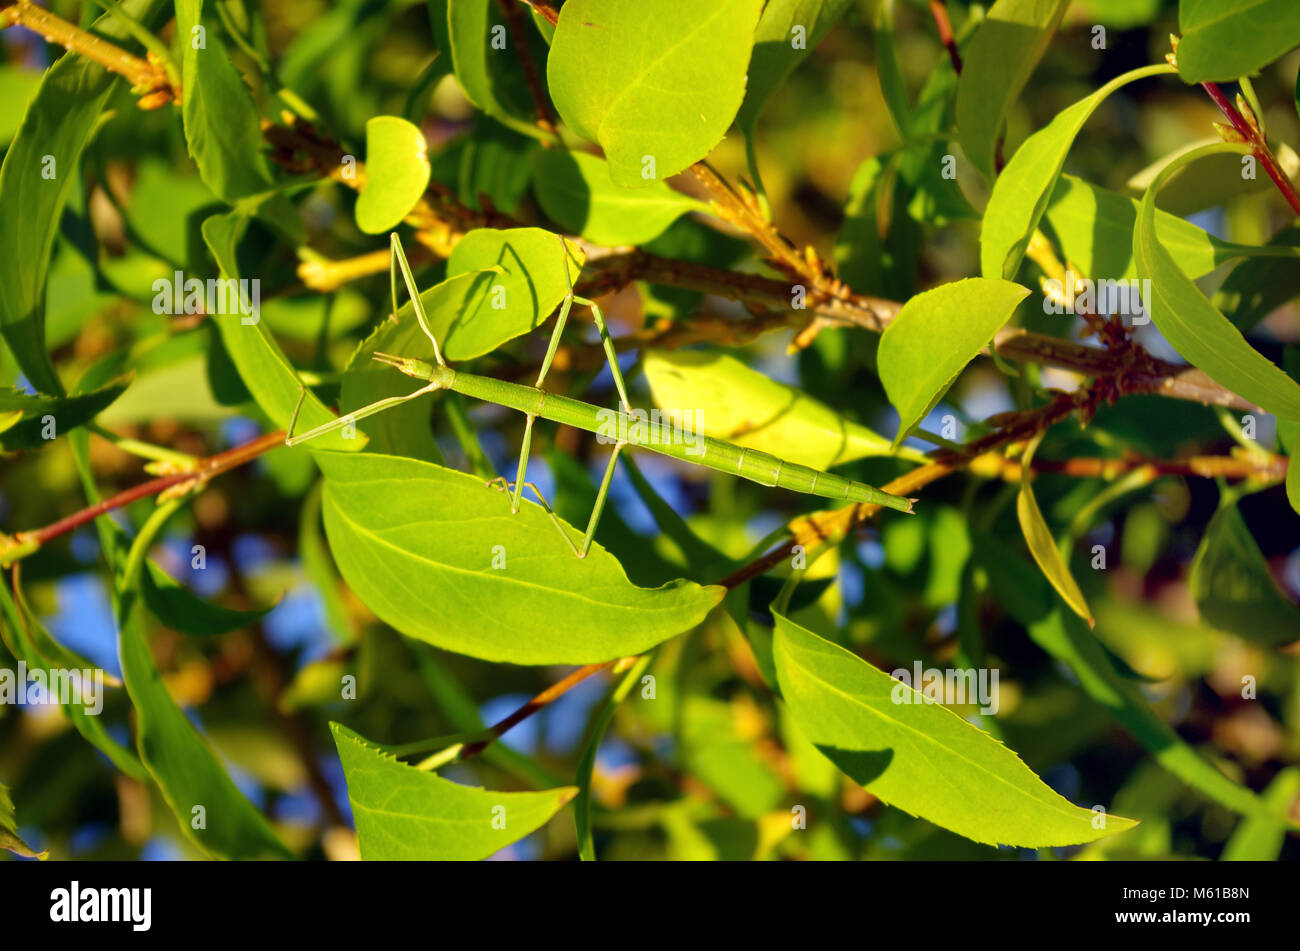 Stick insect hanging in vegetation. Stick insects are insects in the order Phasmatodea. They are camouflaged as either sticks or leaves Stock Photo